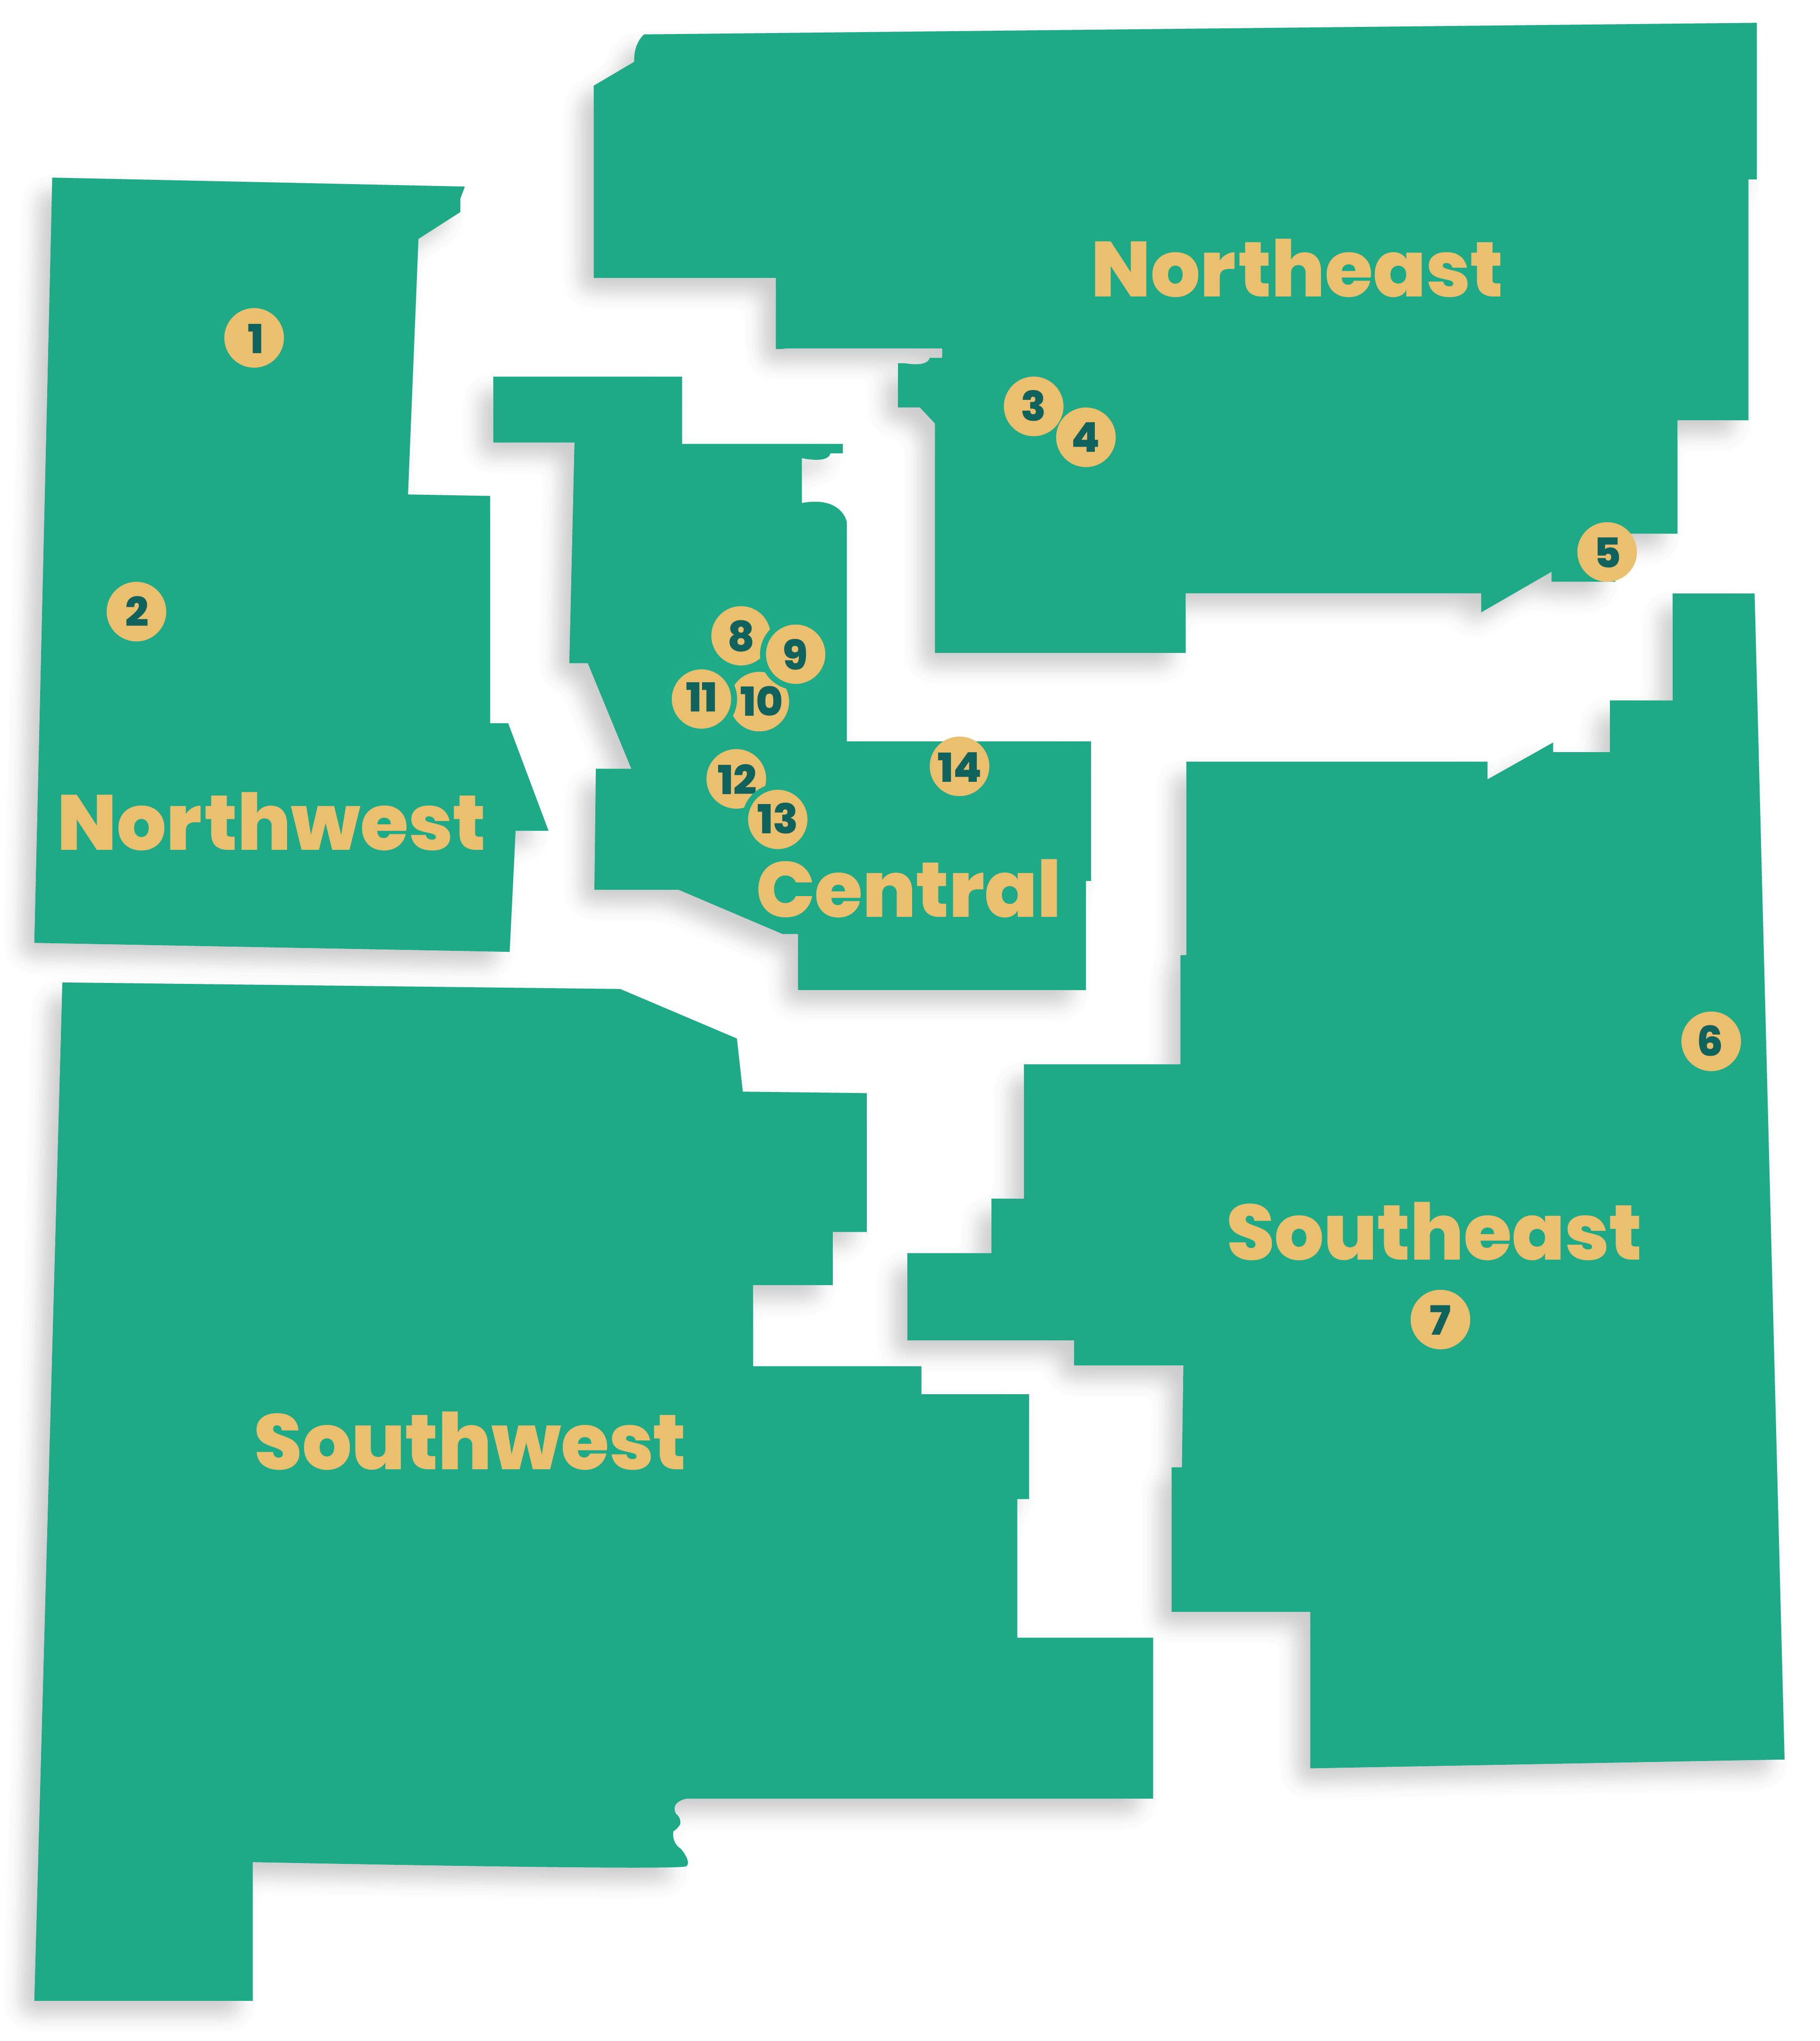 New Mexico Map 